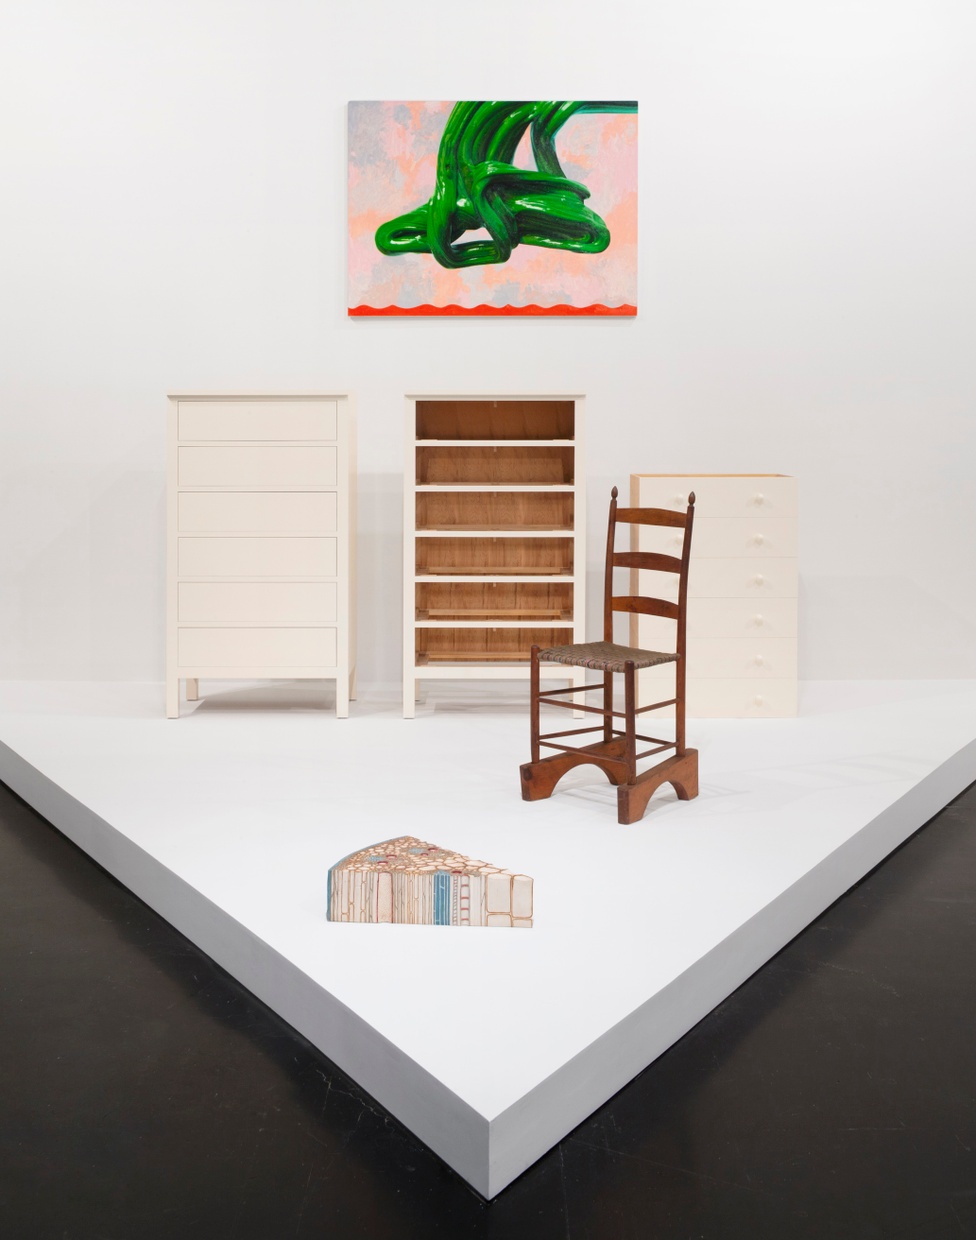 A pink and green artwork hangs on a white wall and below are three white dressers and a wooden chair with an abstract triangular object in front.